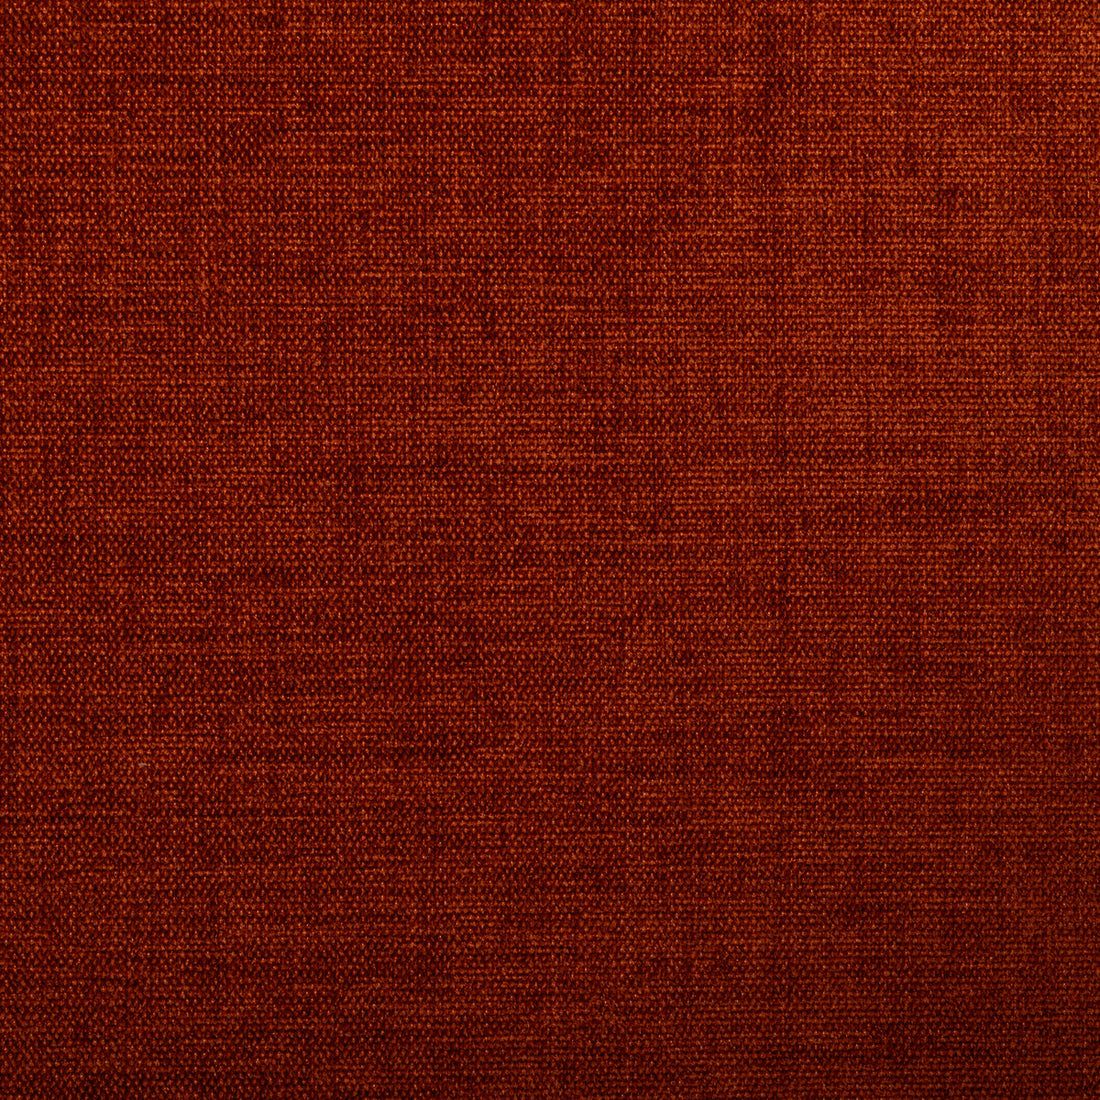 Kravet Contract fabric in 34961-212 color - pattern 34961.212.0 - by Kravet Contract in the Performance Kravetarmor collection